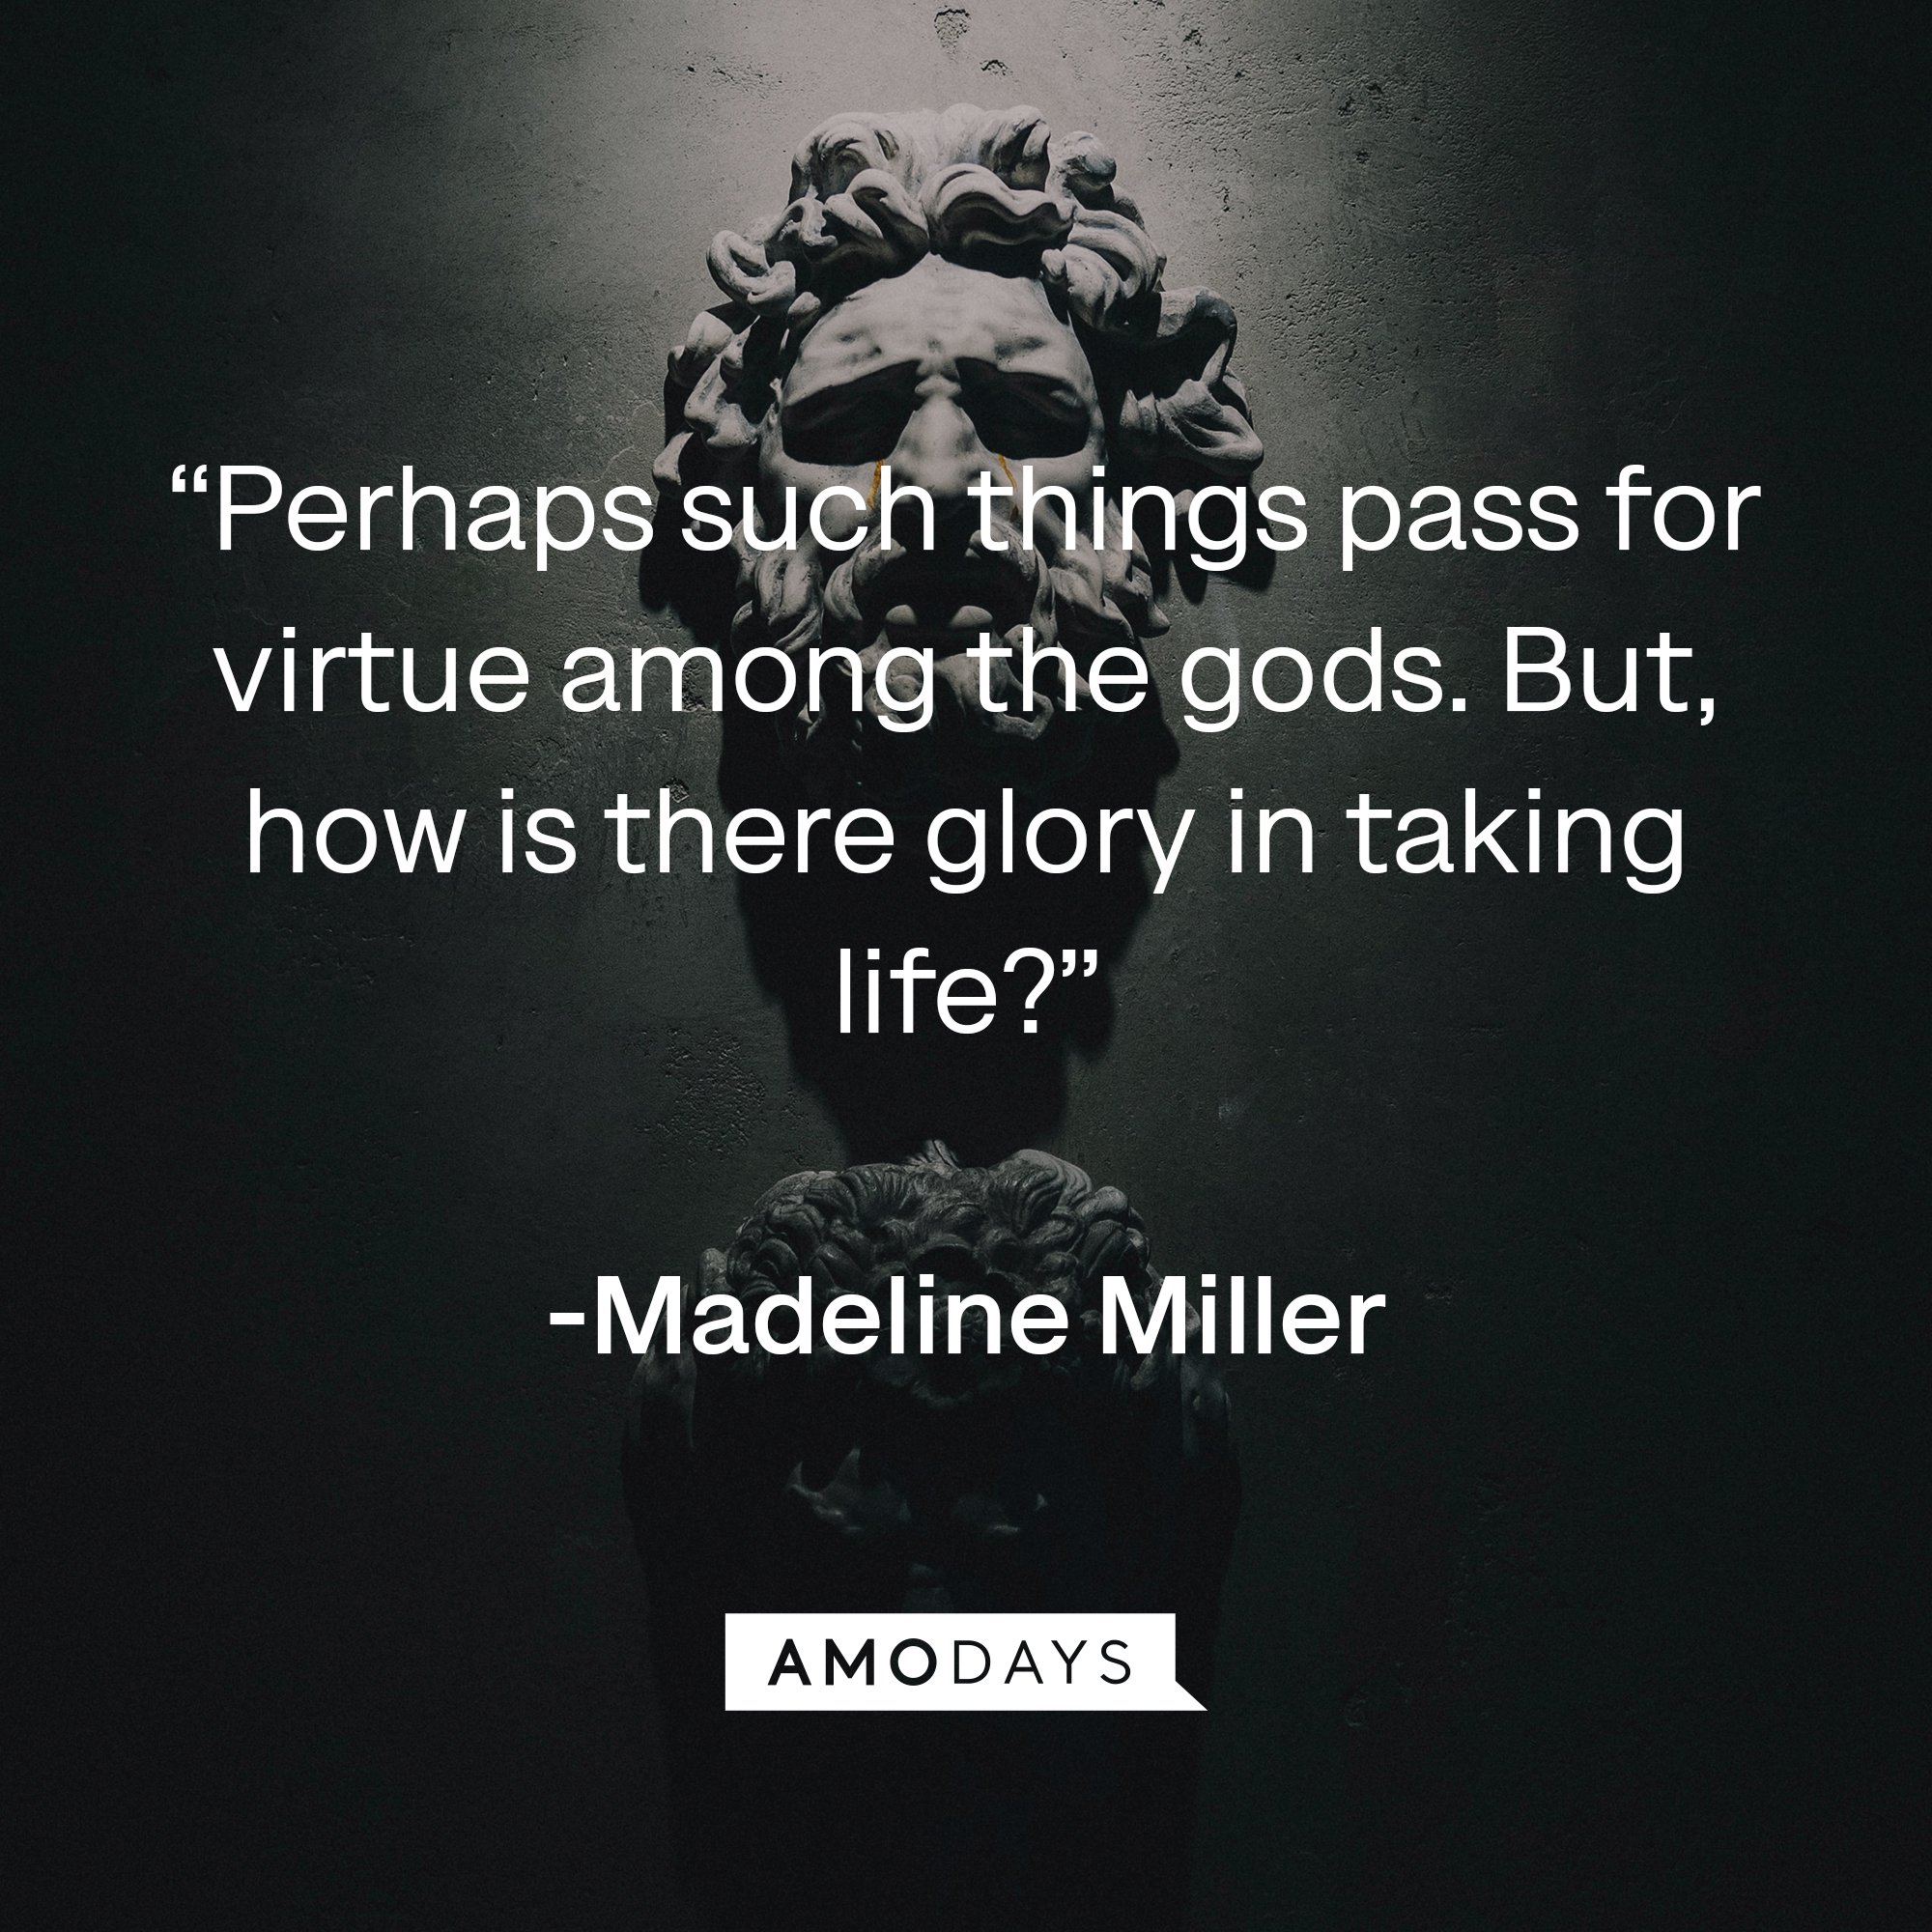 Madeline Miller" quote: “Perhaps such things pass for virtue among the gods. But, how is there glory in taking life?” | Image: AmoDays